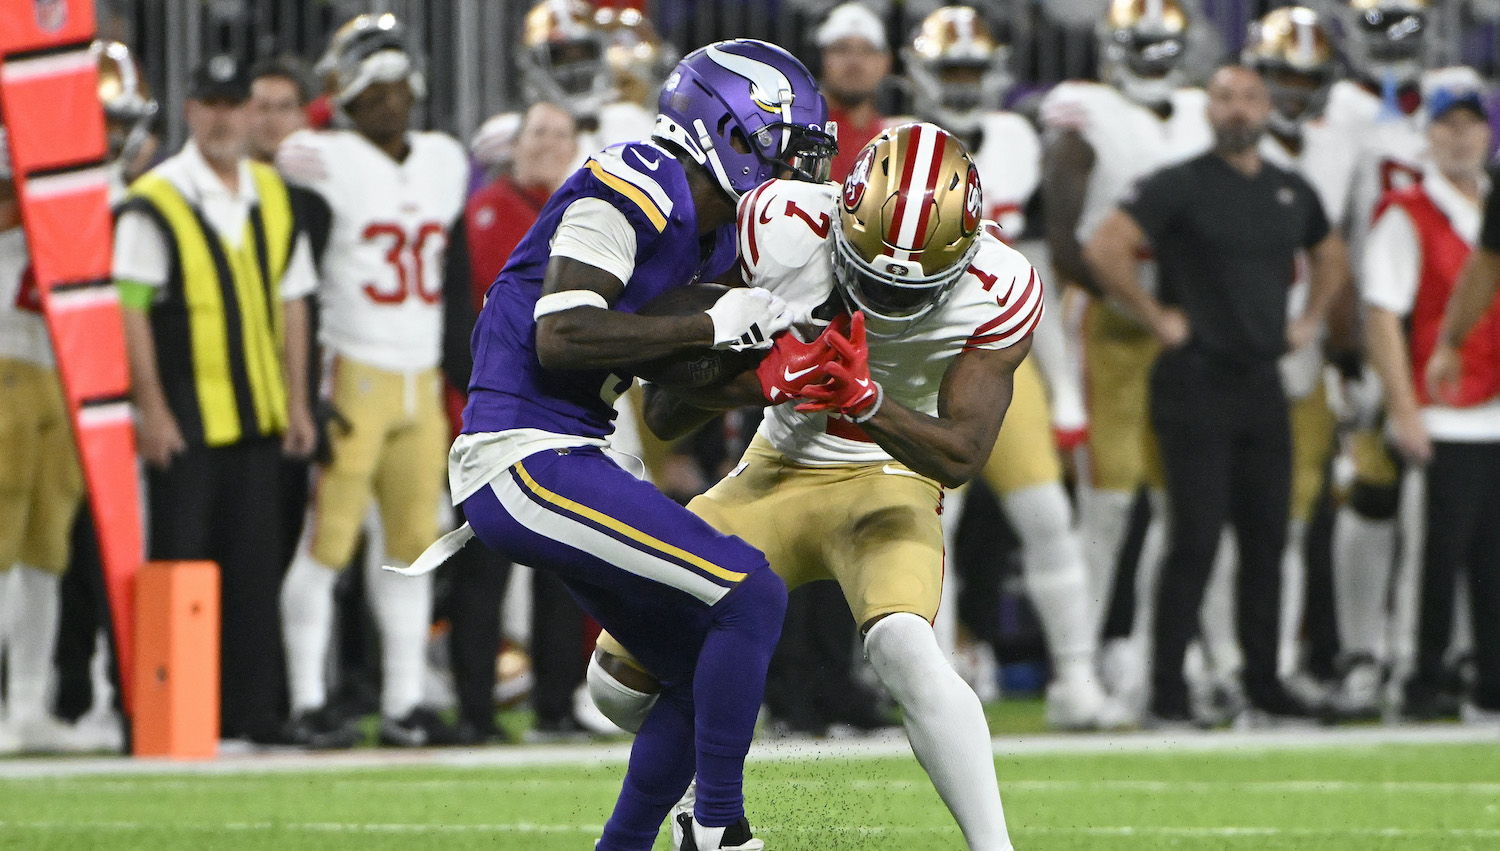 MINNEAPOLIS, MINNESOTA - OCTOBER 23: Jordan Addison #3 of the Minnesota Vikings catches a first half touchdown against Charvarius Ward #7 of the San Francisco 49ers at U.S. Bank Stadium on October 23, 2023 in Minneapolis, Minnesota. (Photo by Stephen Maturen/Getty Images)